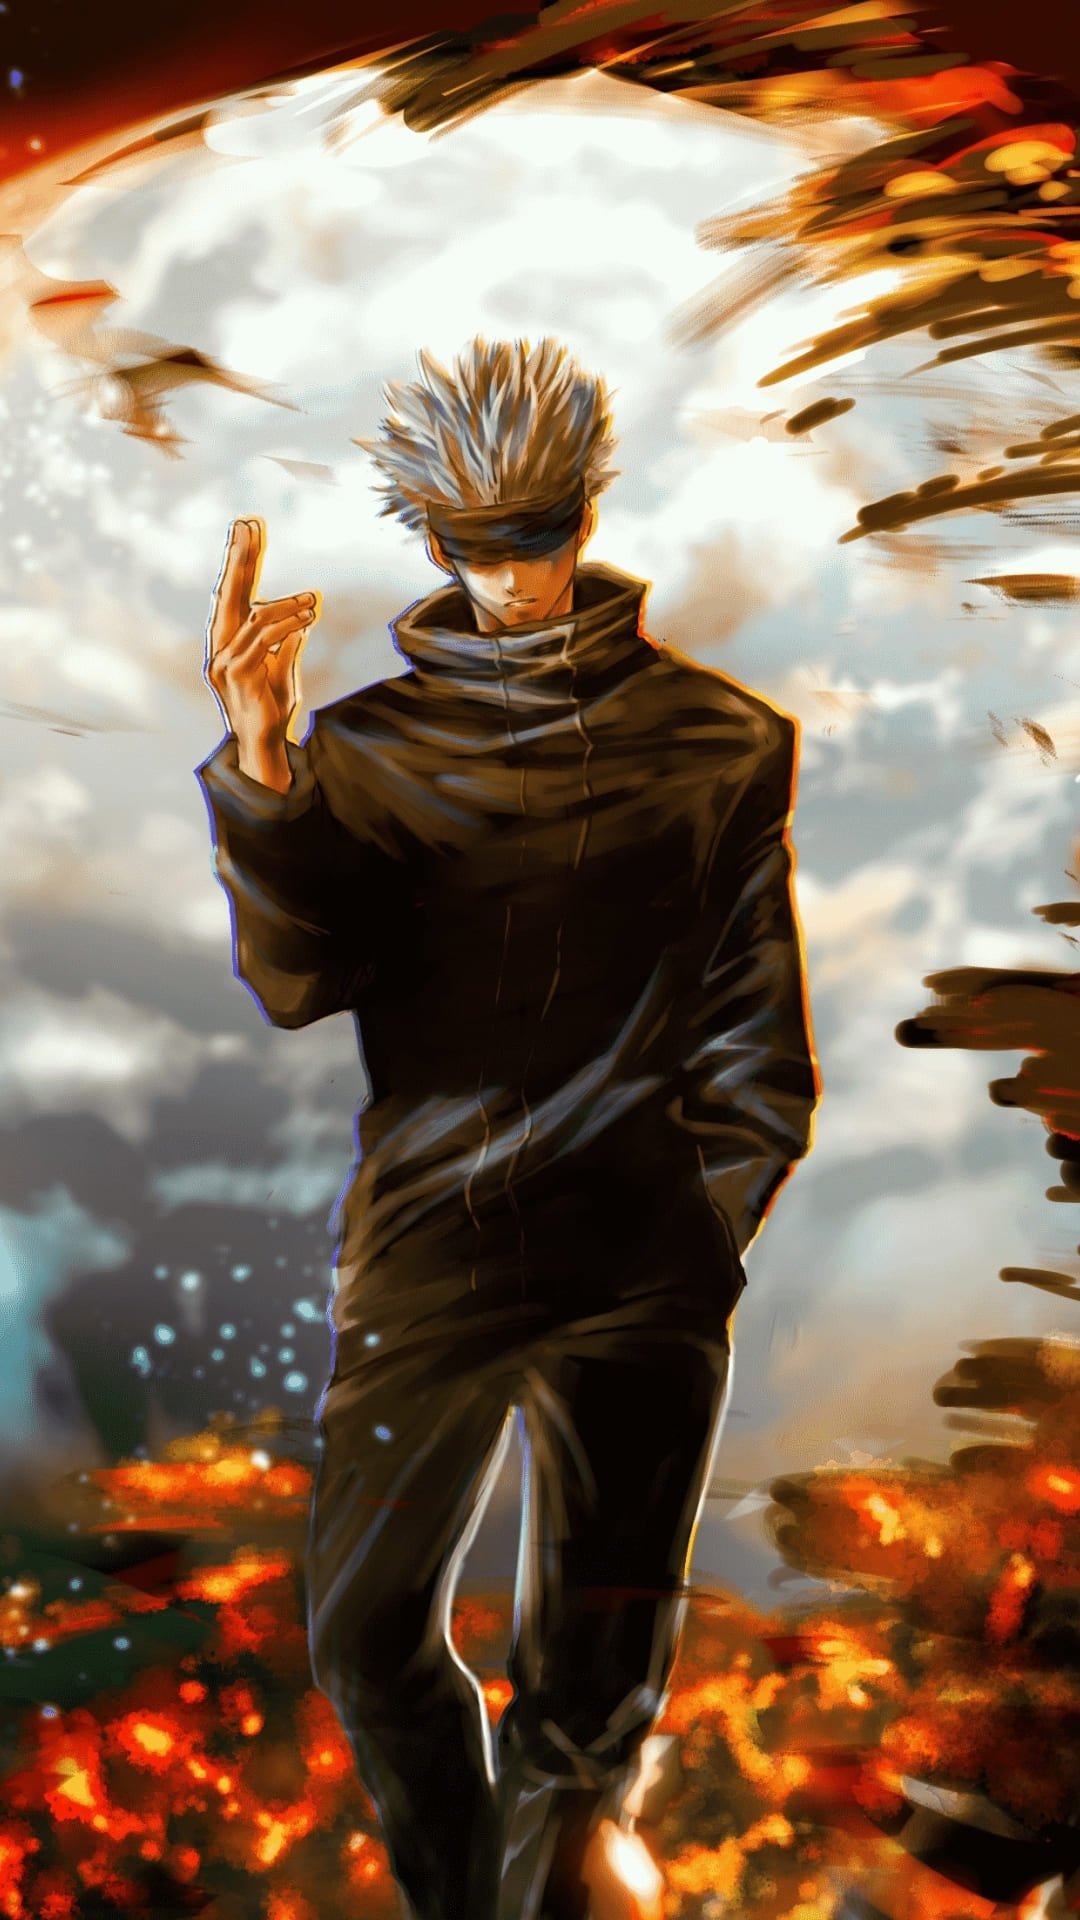 Top 15 Anime iPhone 14, 14 Pro, 14 Pro Max Wallpapers